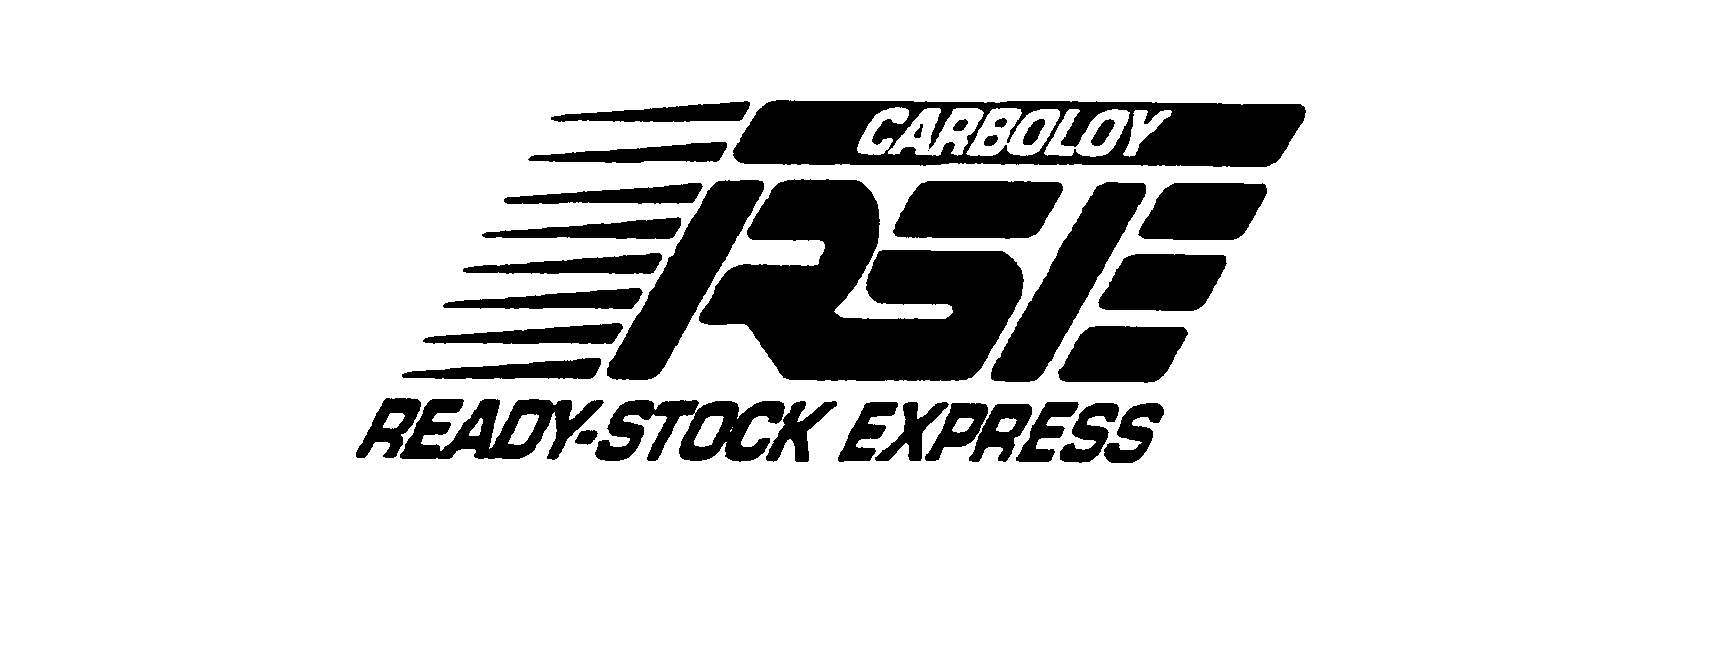  CARBOLOY RSE READY-STOCK EXPRESS